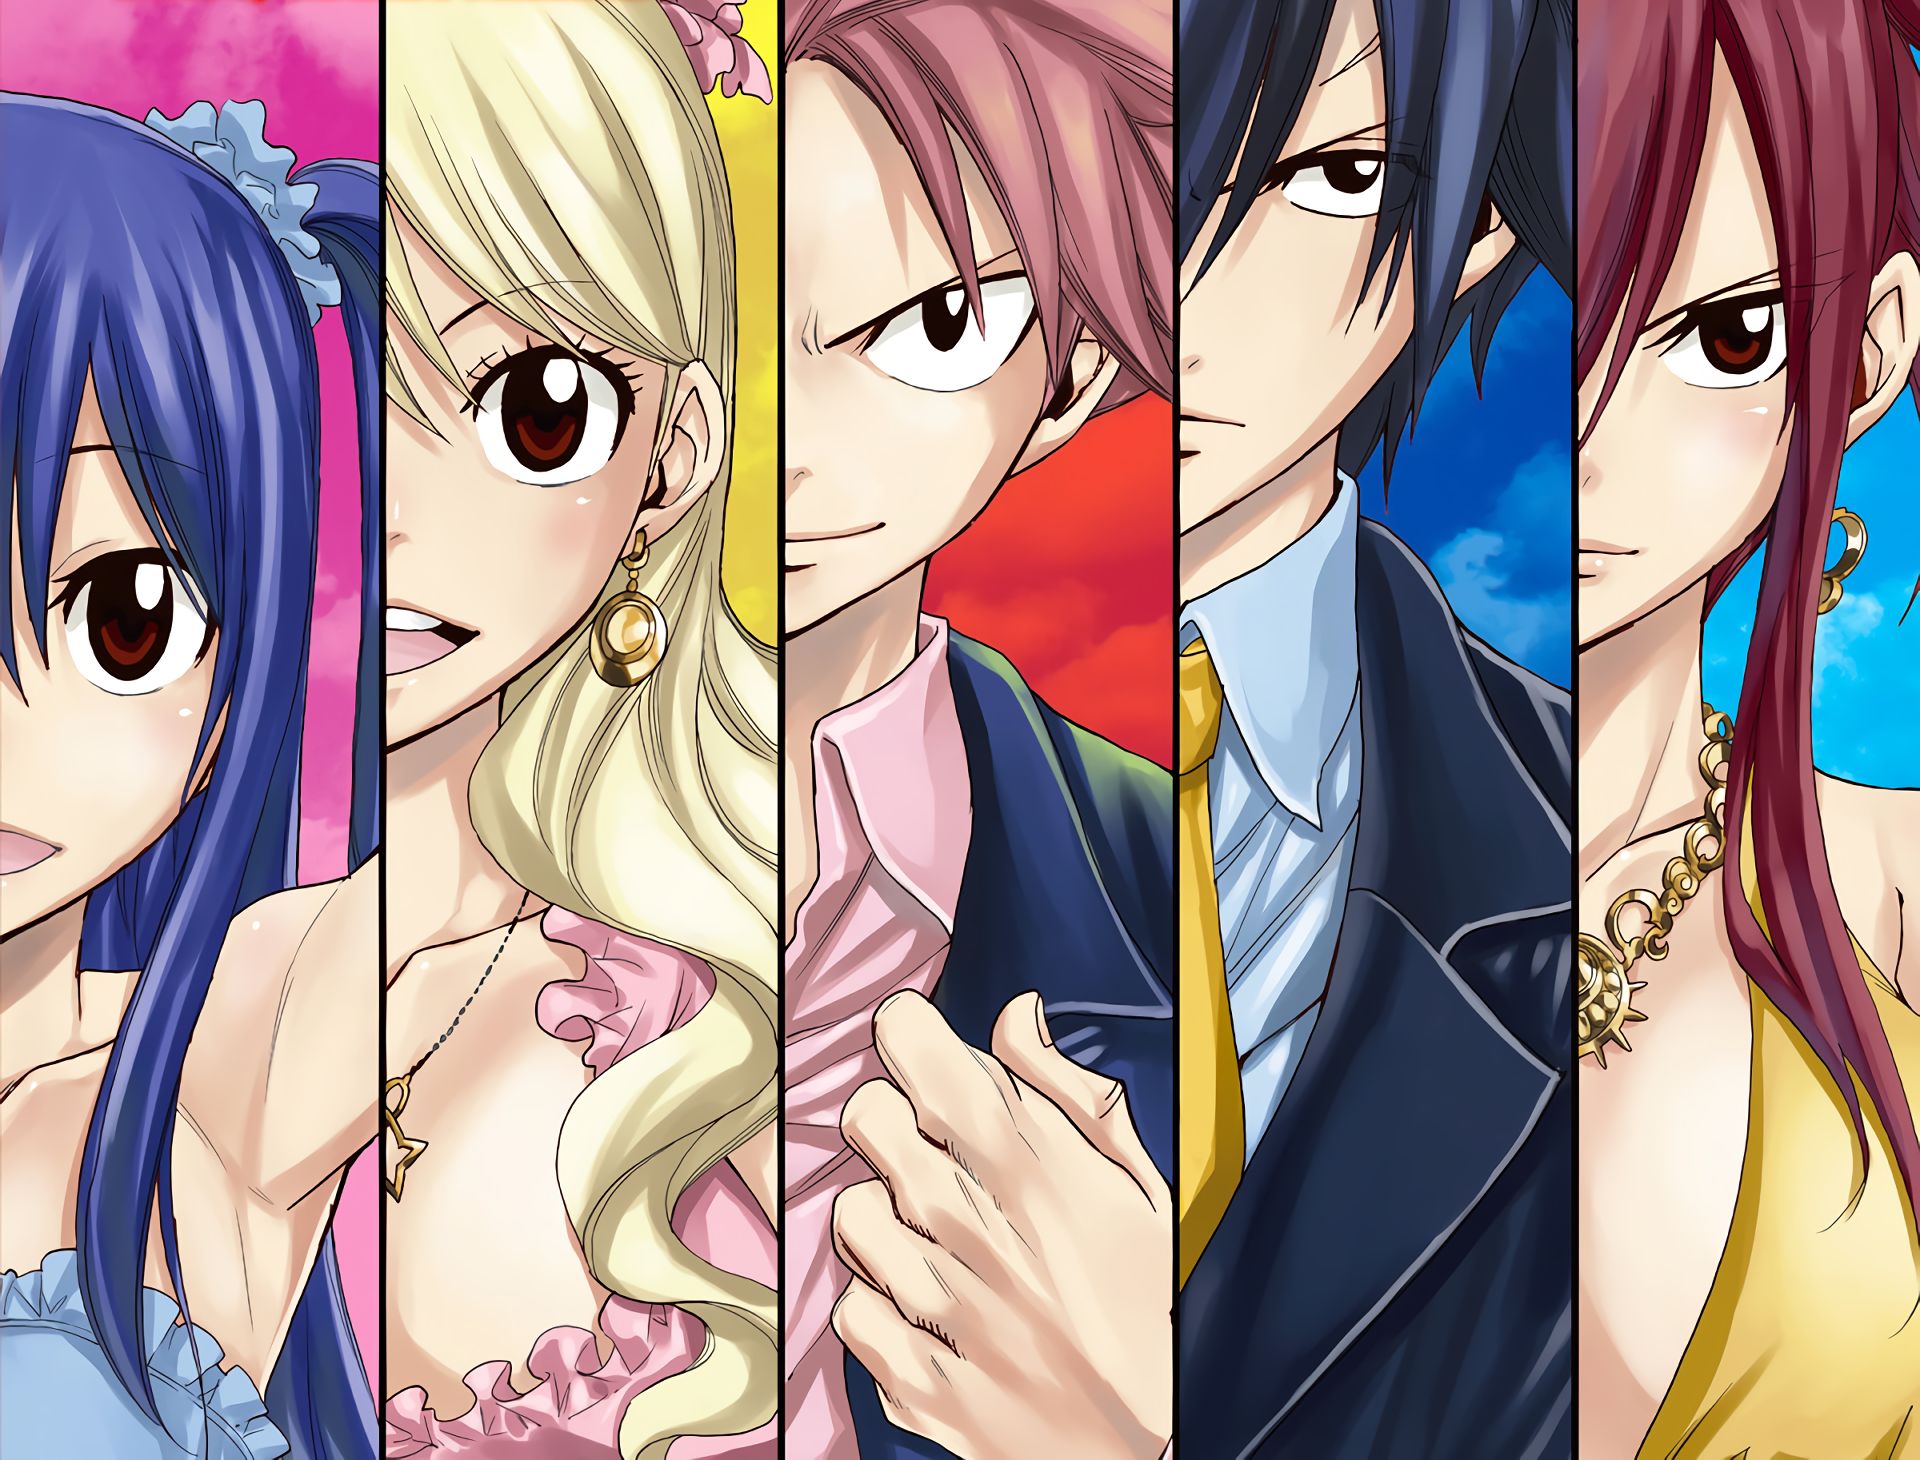 HD desktop wallpaper: Anime, Fairy Tail, Lucy Heartfilia, Natsu Dragneel,  Erza Scarlet, Gray Fullbuster, Wendy Marvell download free picture #780141